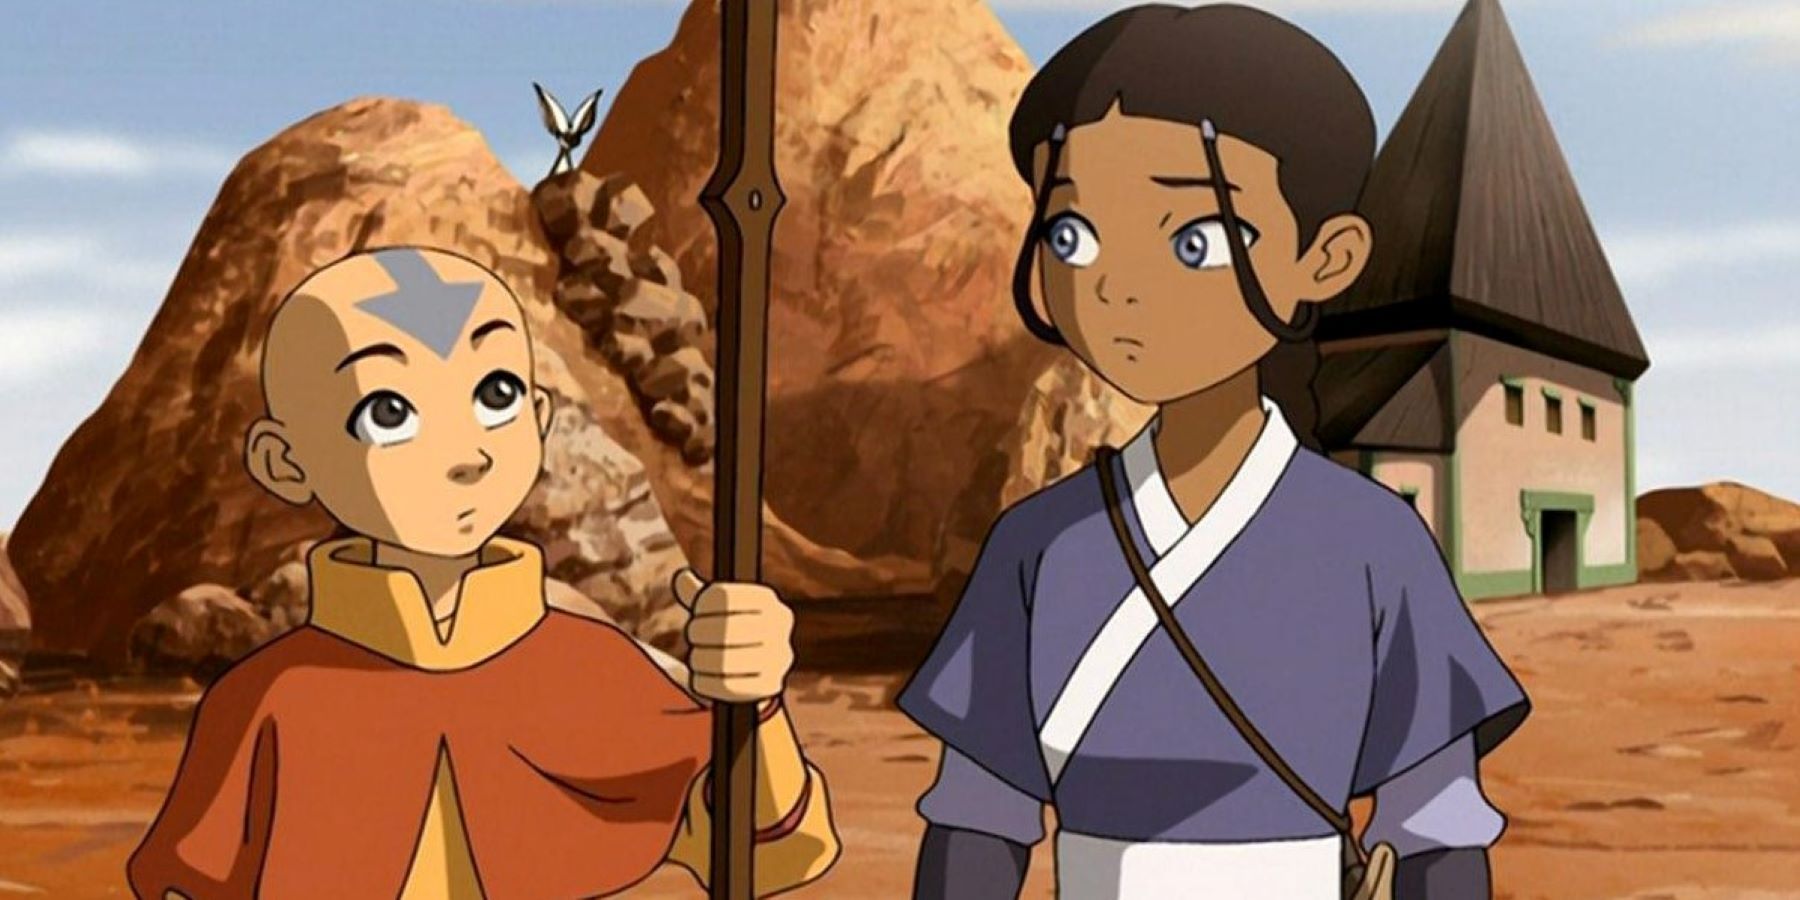 Aang, Katara, and Momo in the Earth Kingdom in Avatar: The Last Airbender